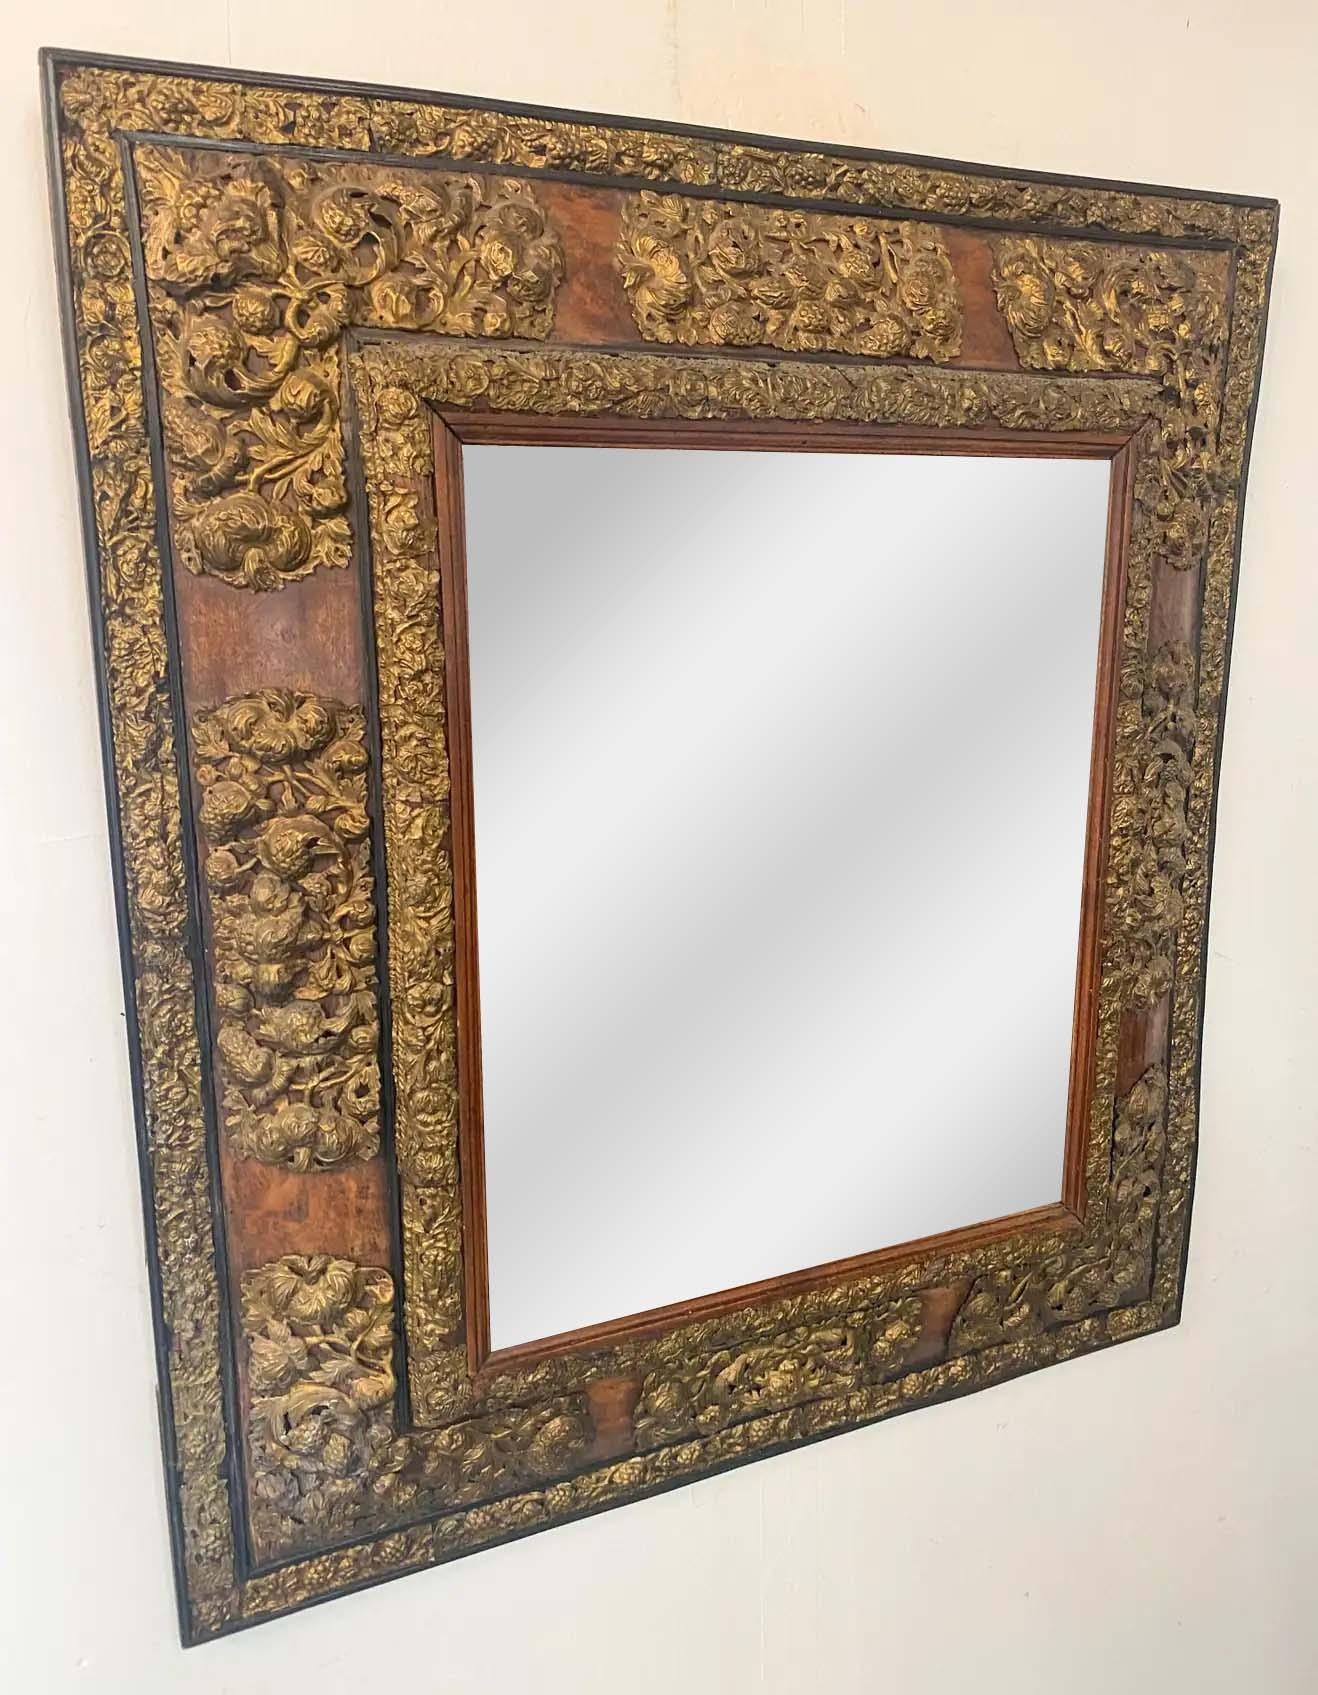 A beautiful antique 19th century Art Nouveau mirror. The mirror features intricate floral design made of foil in gold embellishing the thick three dimensional wooden frame. The mirror is elegant and will be the center piece of any wall or